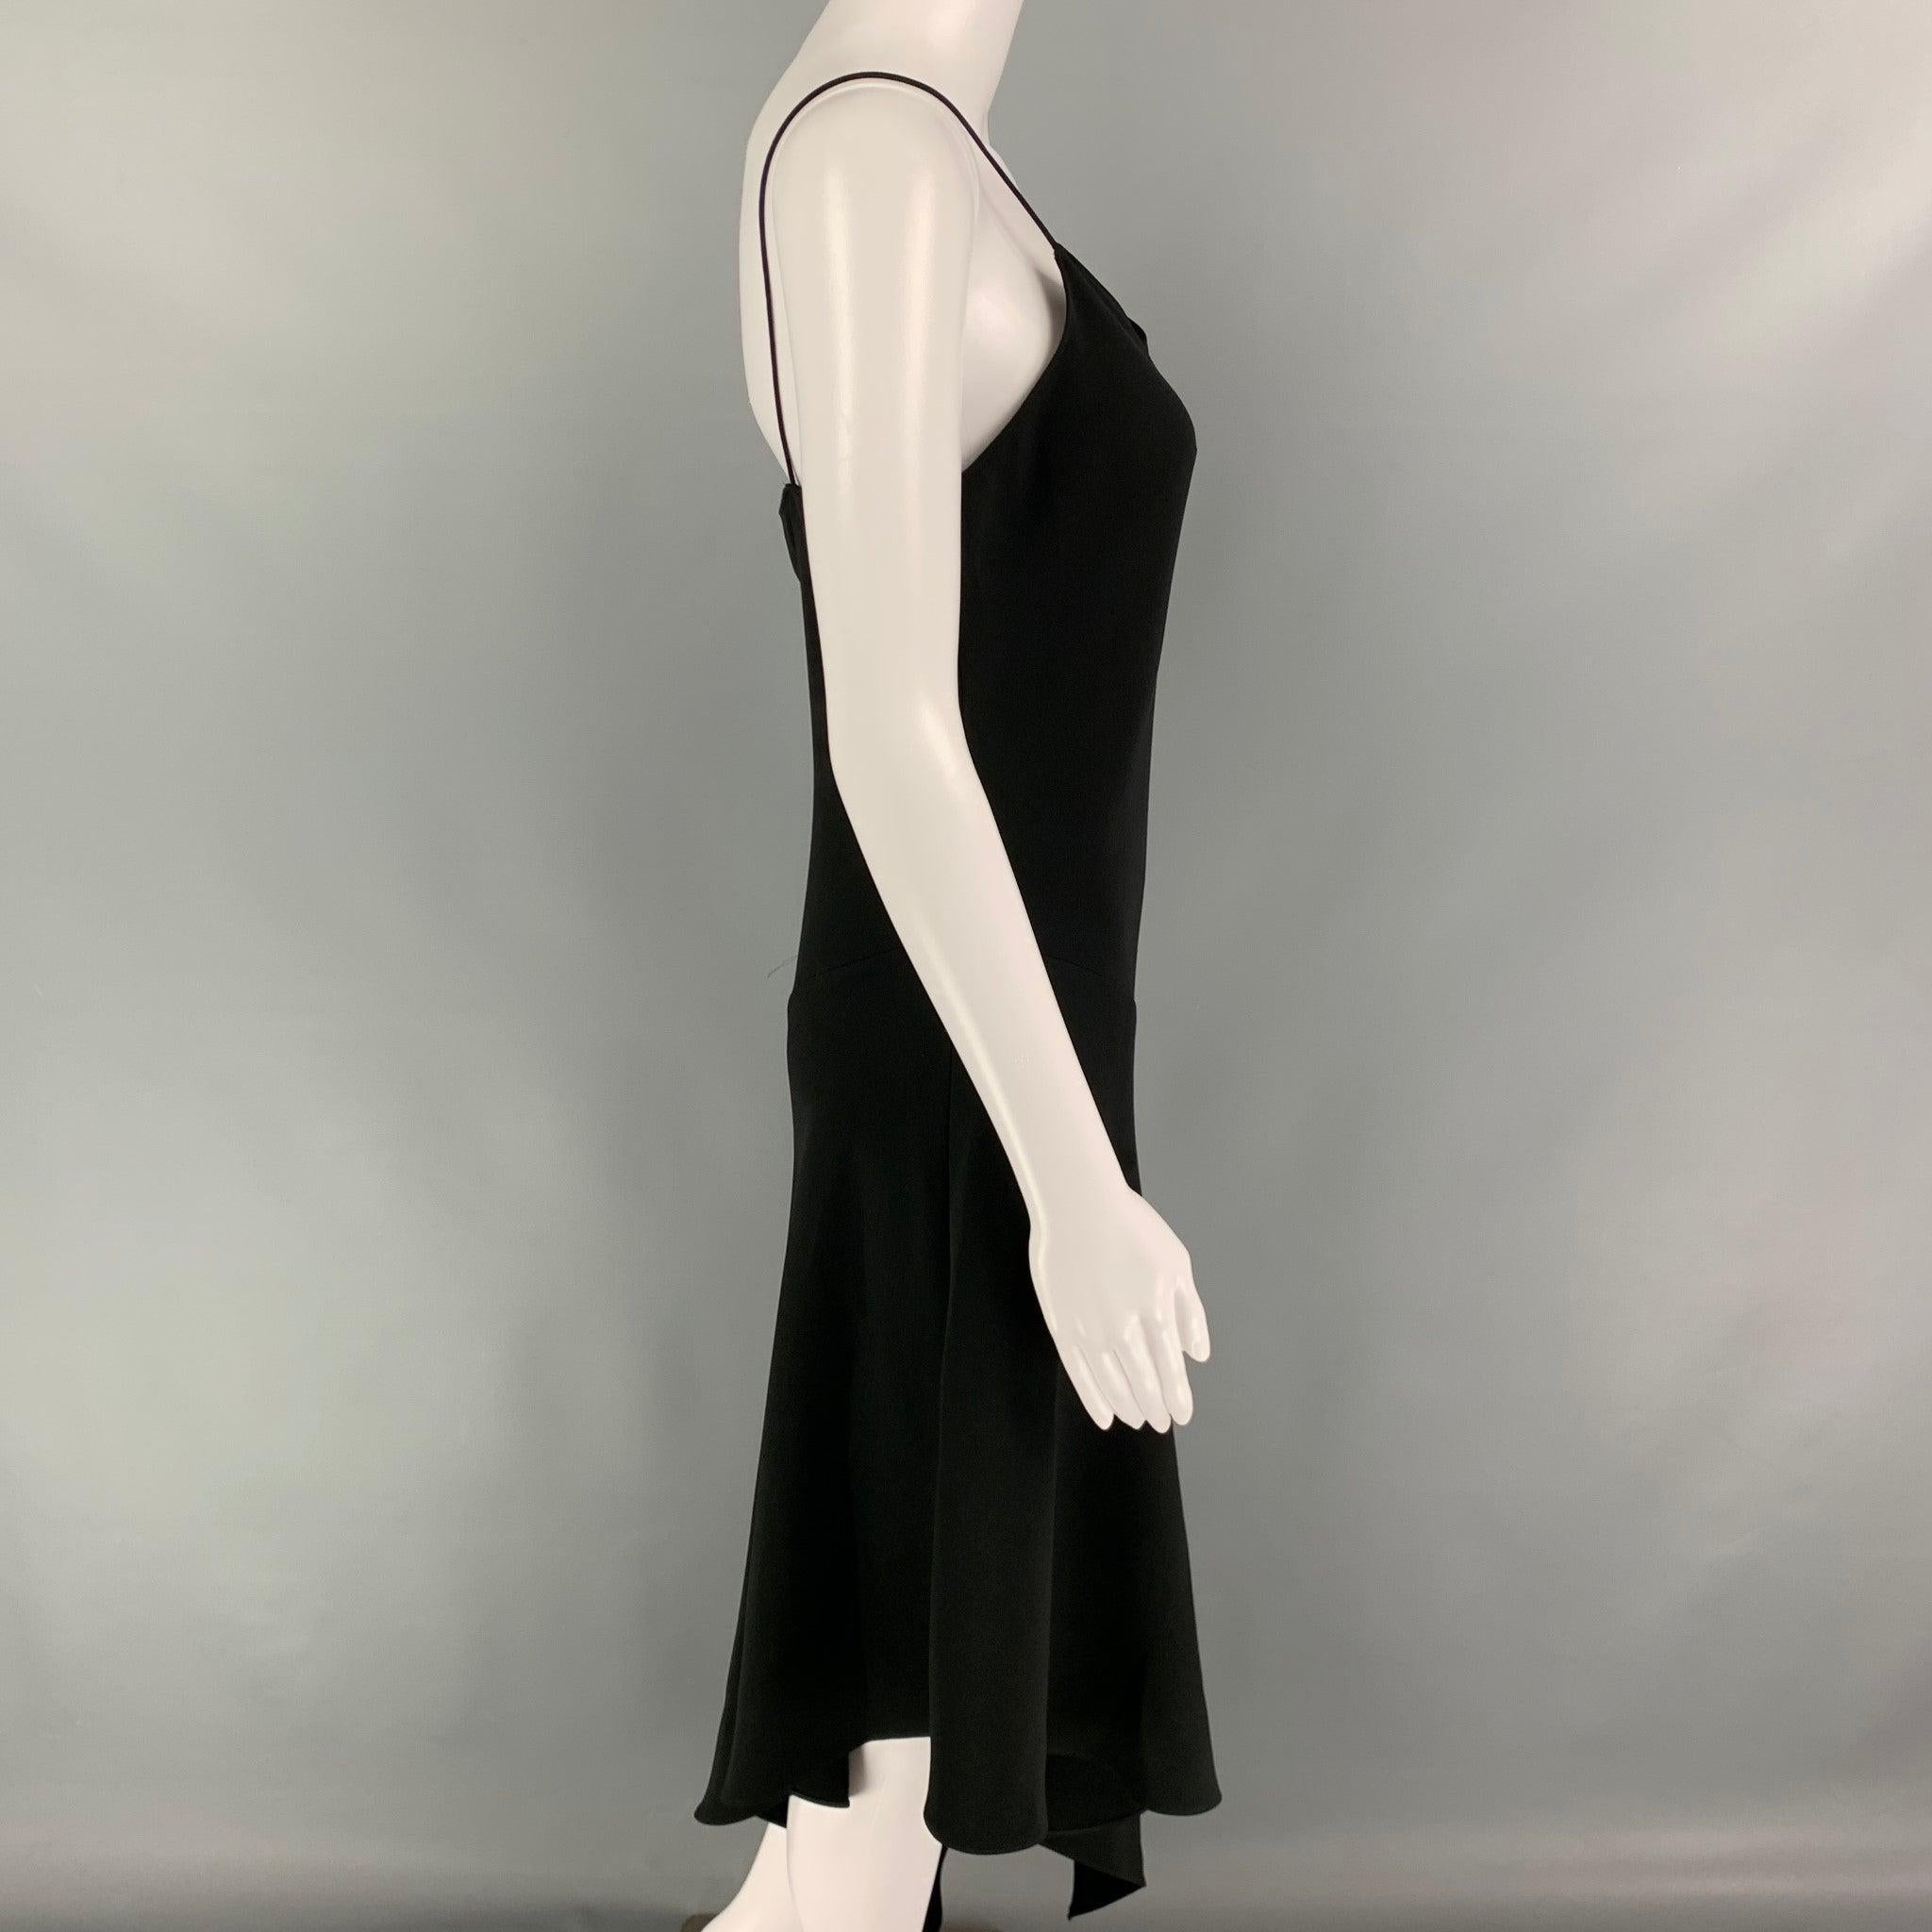 CELINE dress comes in a black stretch silk featuring a asymmetrical design, spaghetti straps, and a slip on style.
Excellent
Pre-Owned Condition. 

Marked:  42 

Measurements: 
 Bust: 32 inches Waist: 26 inches Hip:
32 inches Length: 47 inches 
 
 
